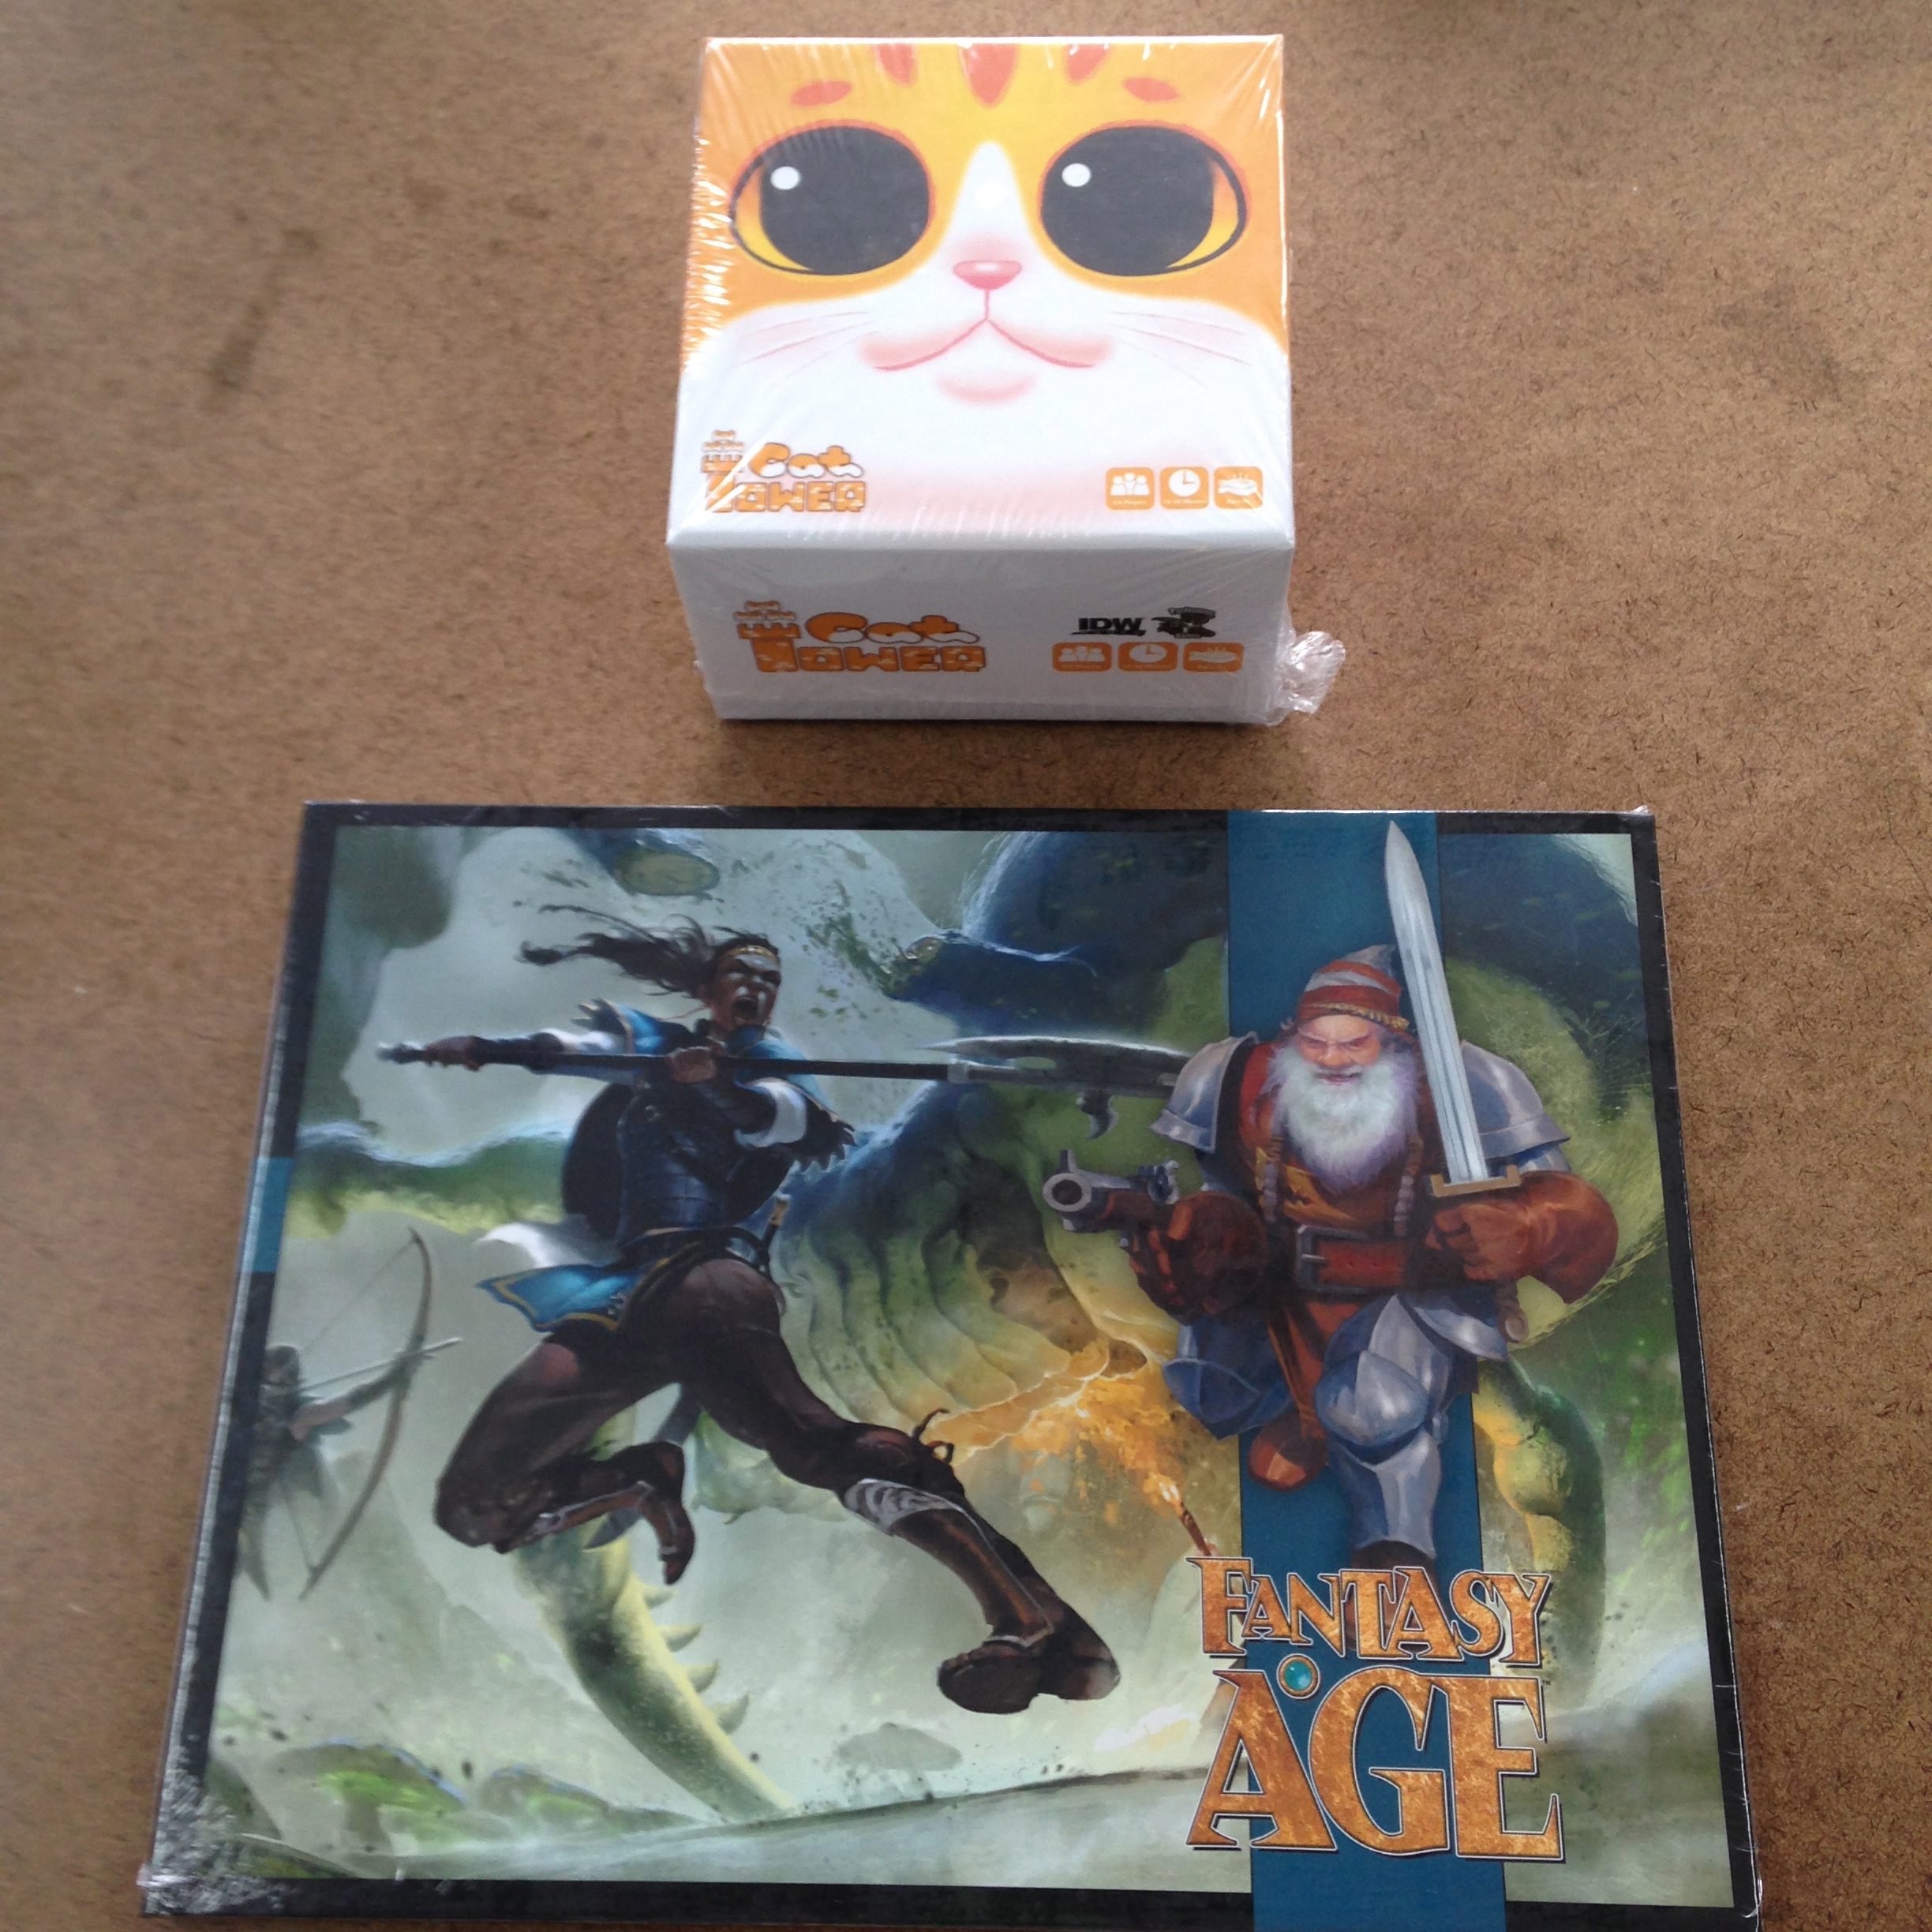 New – Cat Tower, Fantasy Age Screen, White Dwarf #106